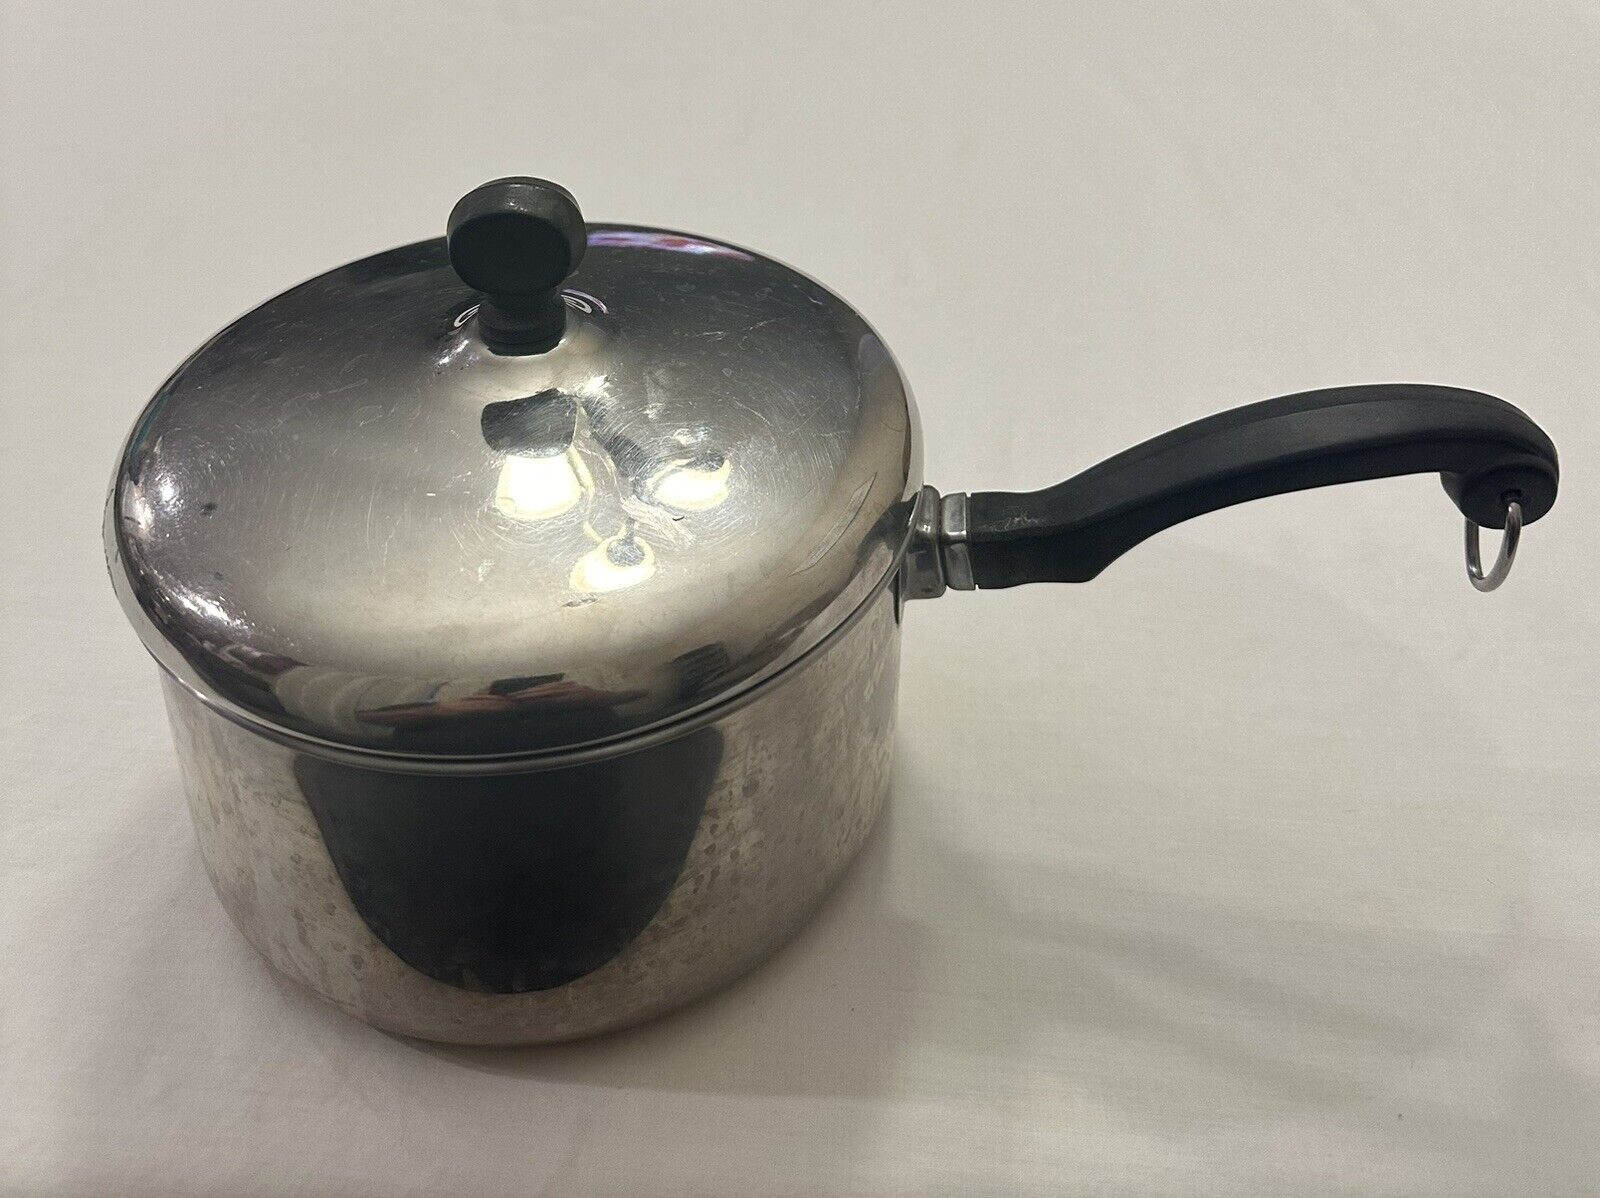 Vintage Farberware 2 QT Sauce Pan Stainless Steel Aluminum Clad with Lid USA